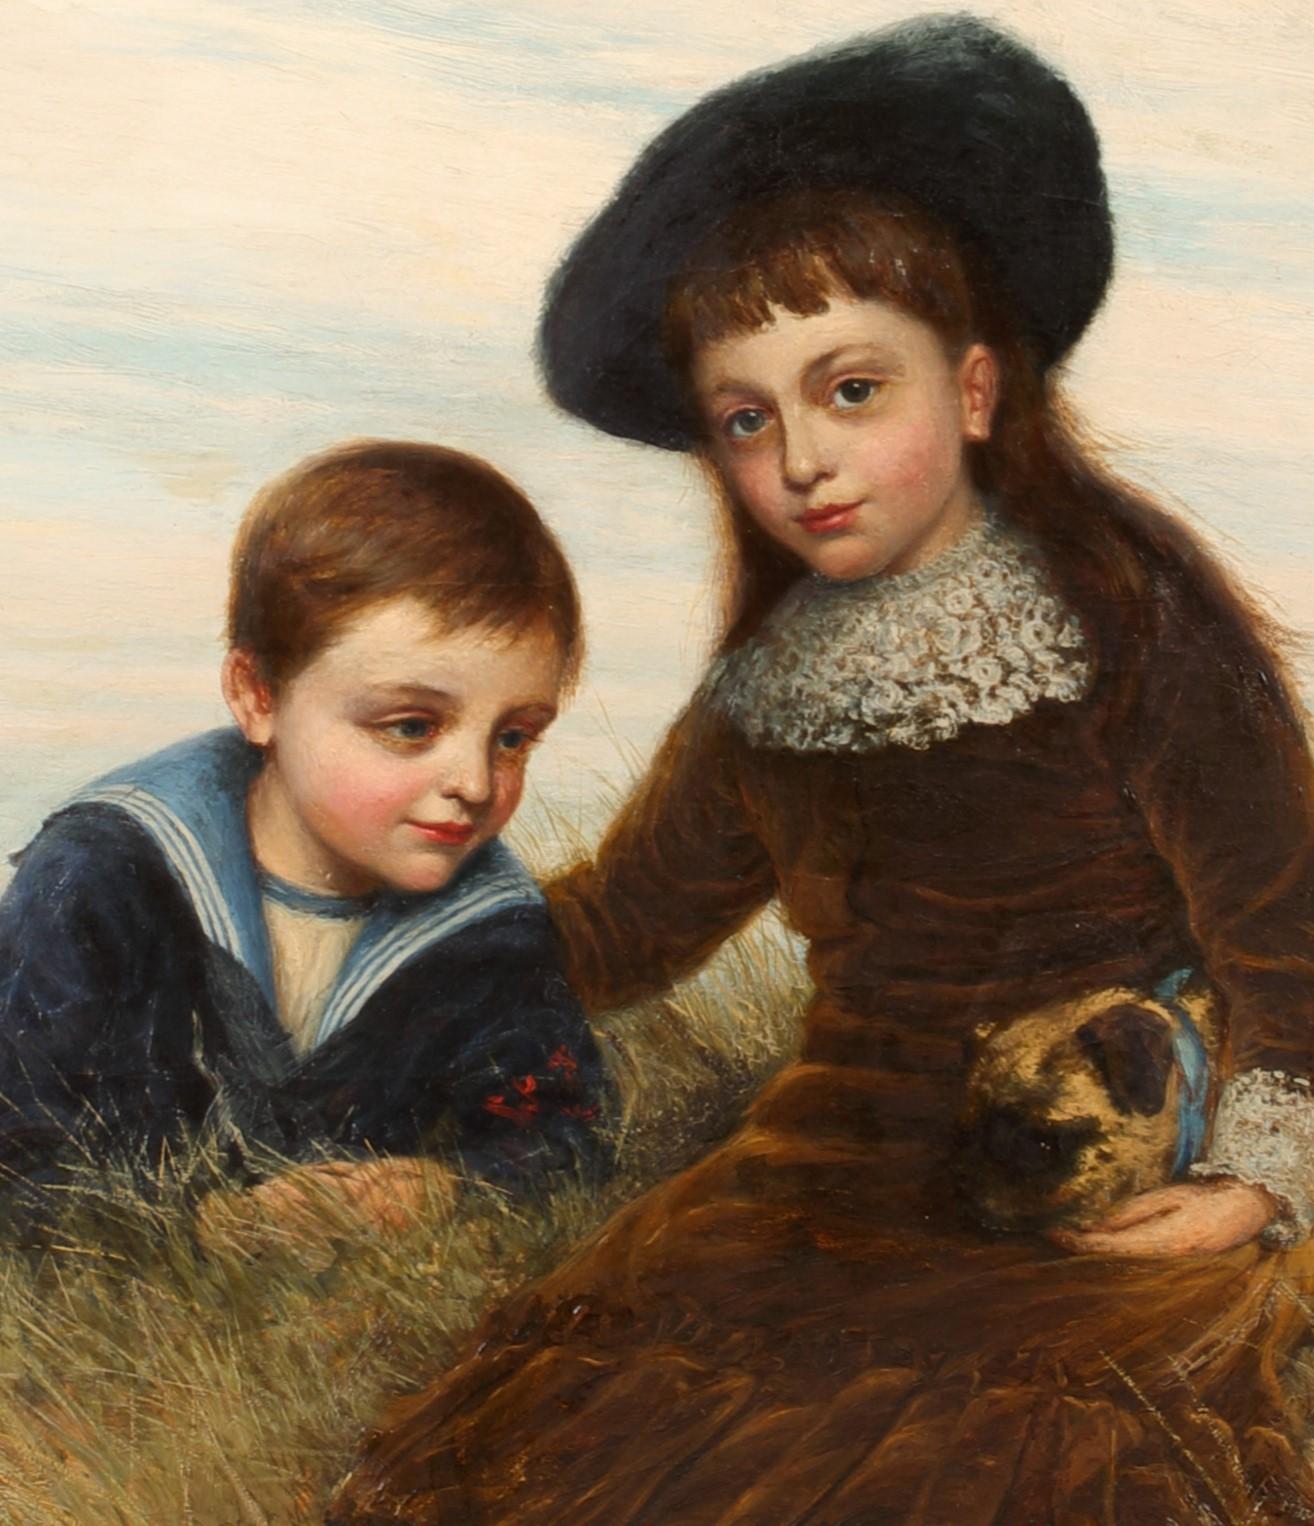 Portrait of Roland Laura & Stephen Astley Kennard, 19th Century

by Joseph FARQUHARSON (1846-1935)

Large 19th Century Scottish portrait of Laura and Stephen Astley Kennard, oil on canvas by Joseph Farquharson. Excellent quality and condition